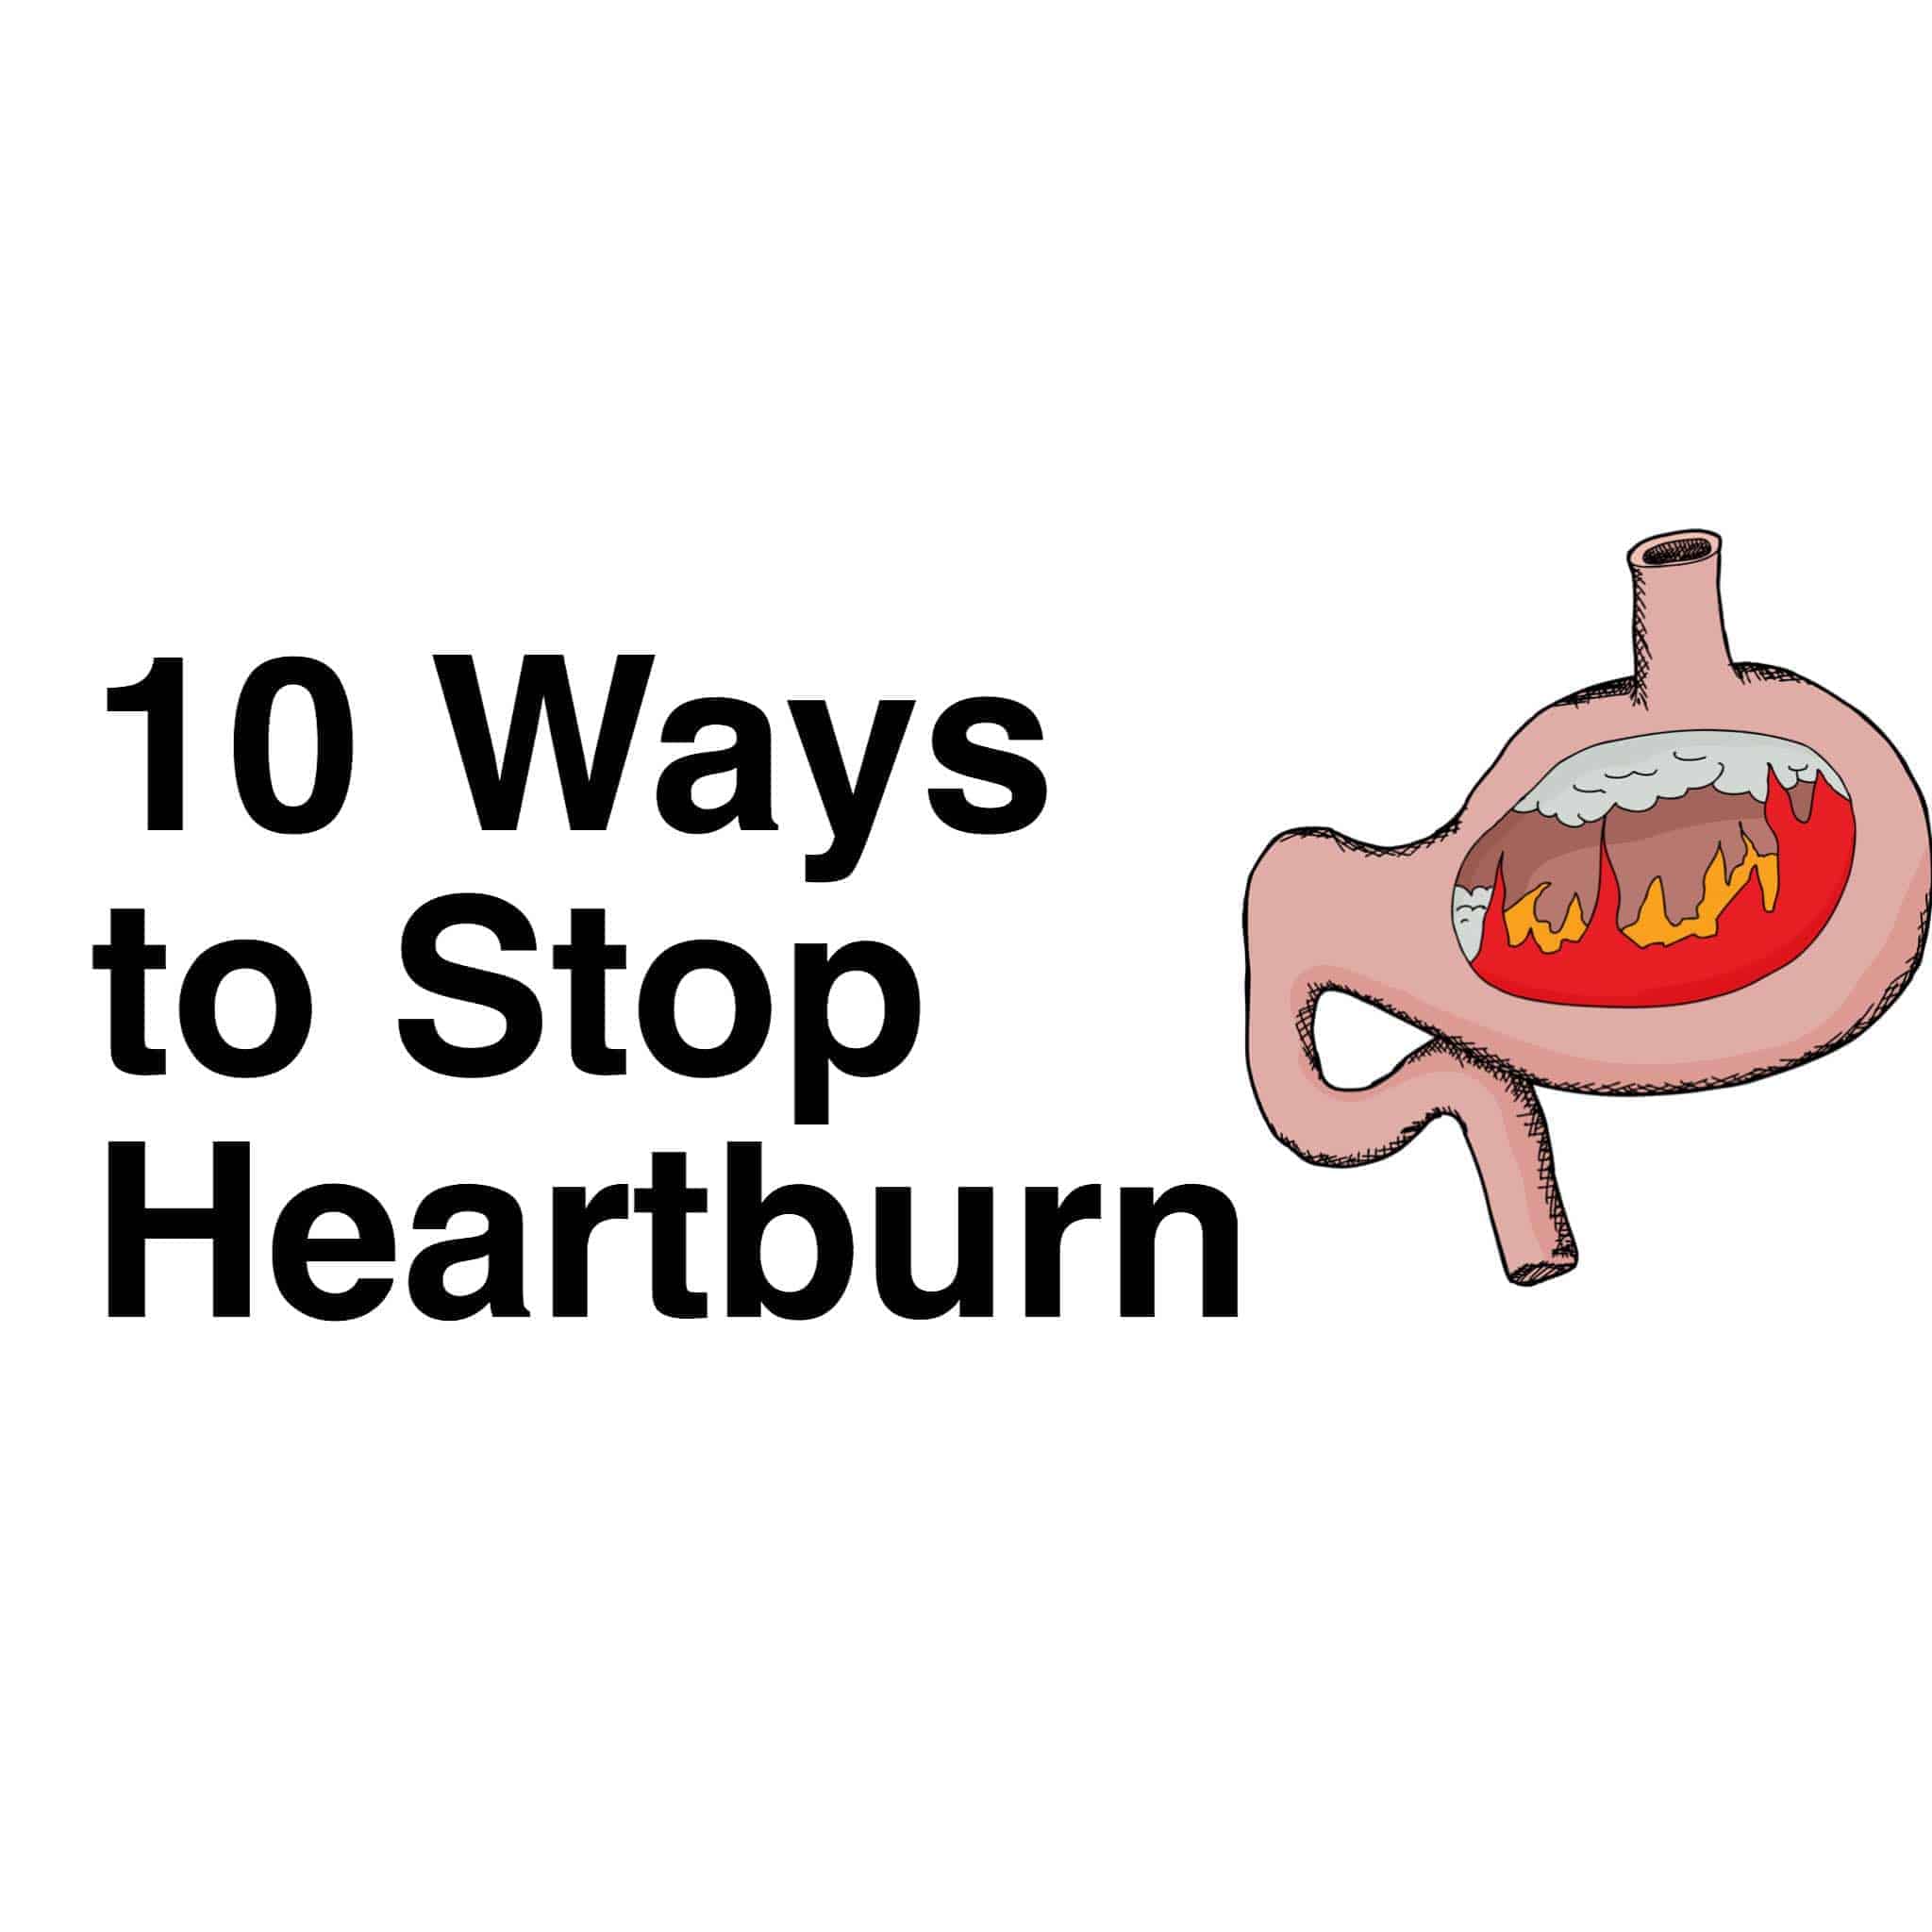 Here Are 10 Ways to Eliminate Heartburn